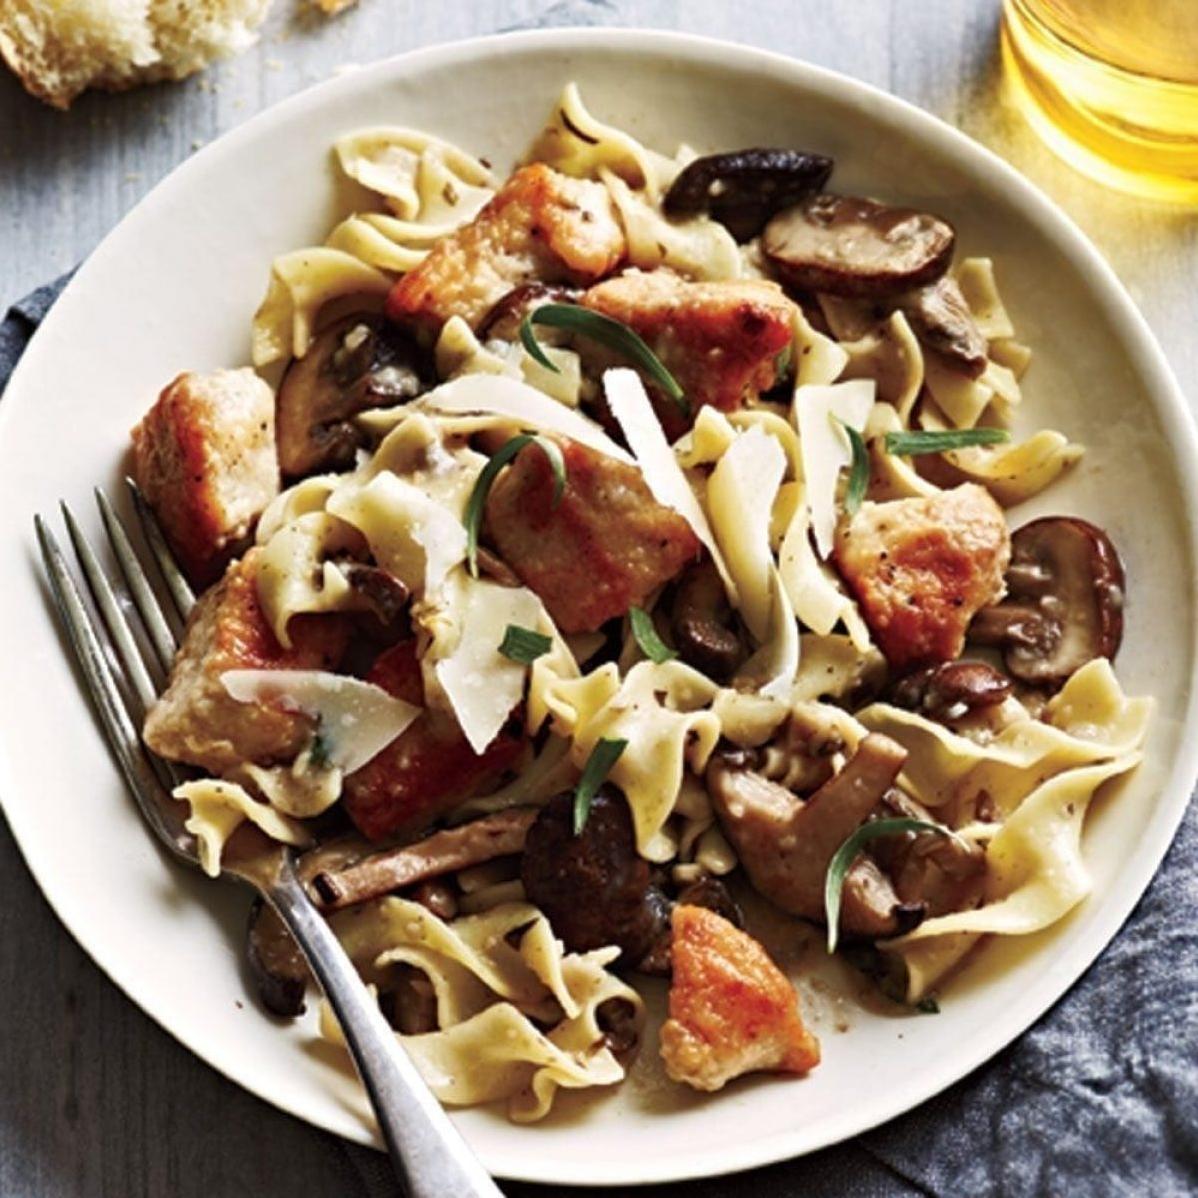  Ready to impress your guests with a delicious pasta dish?